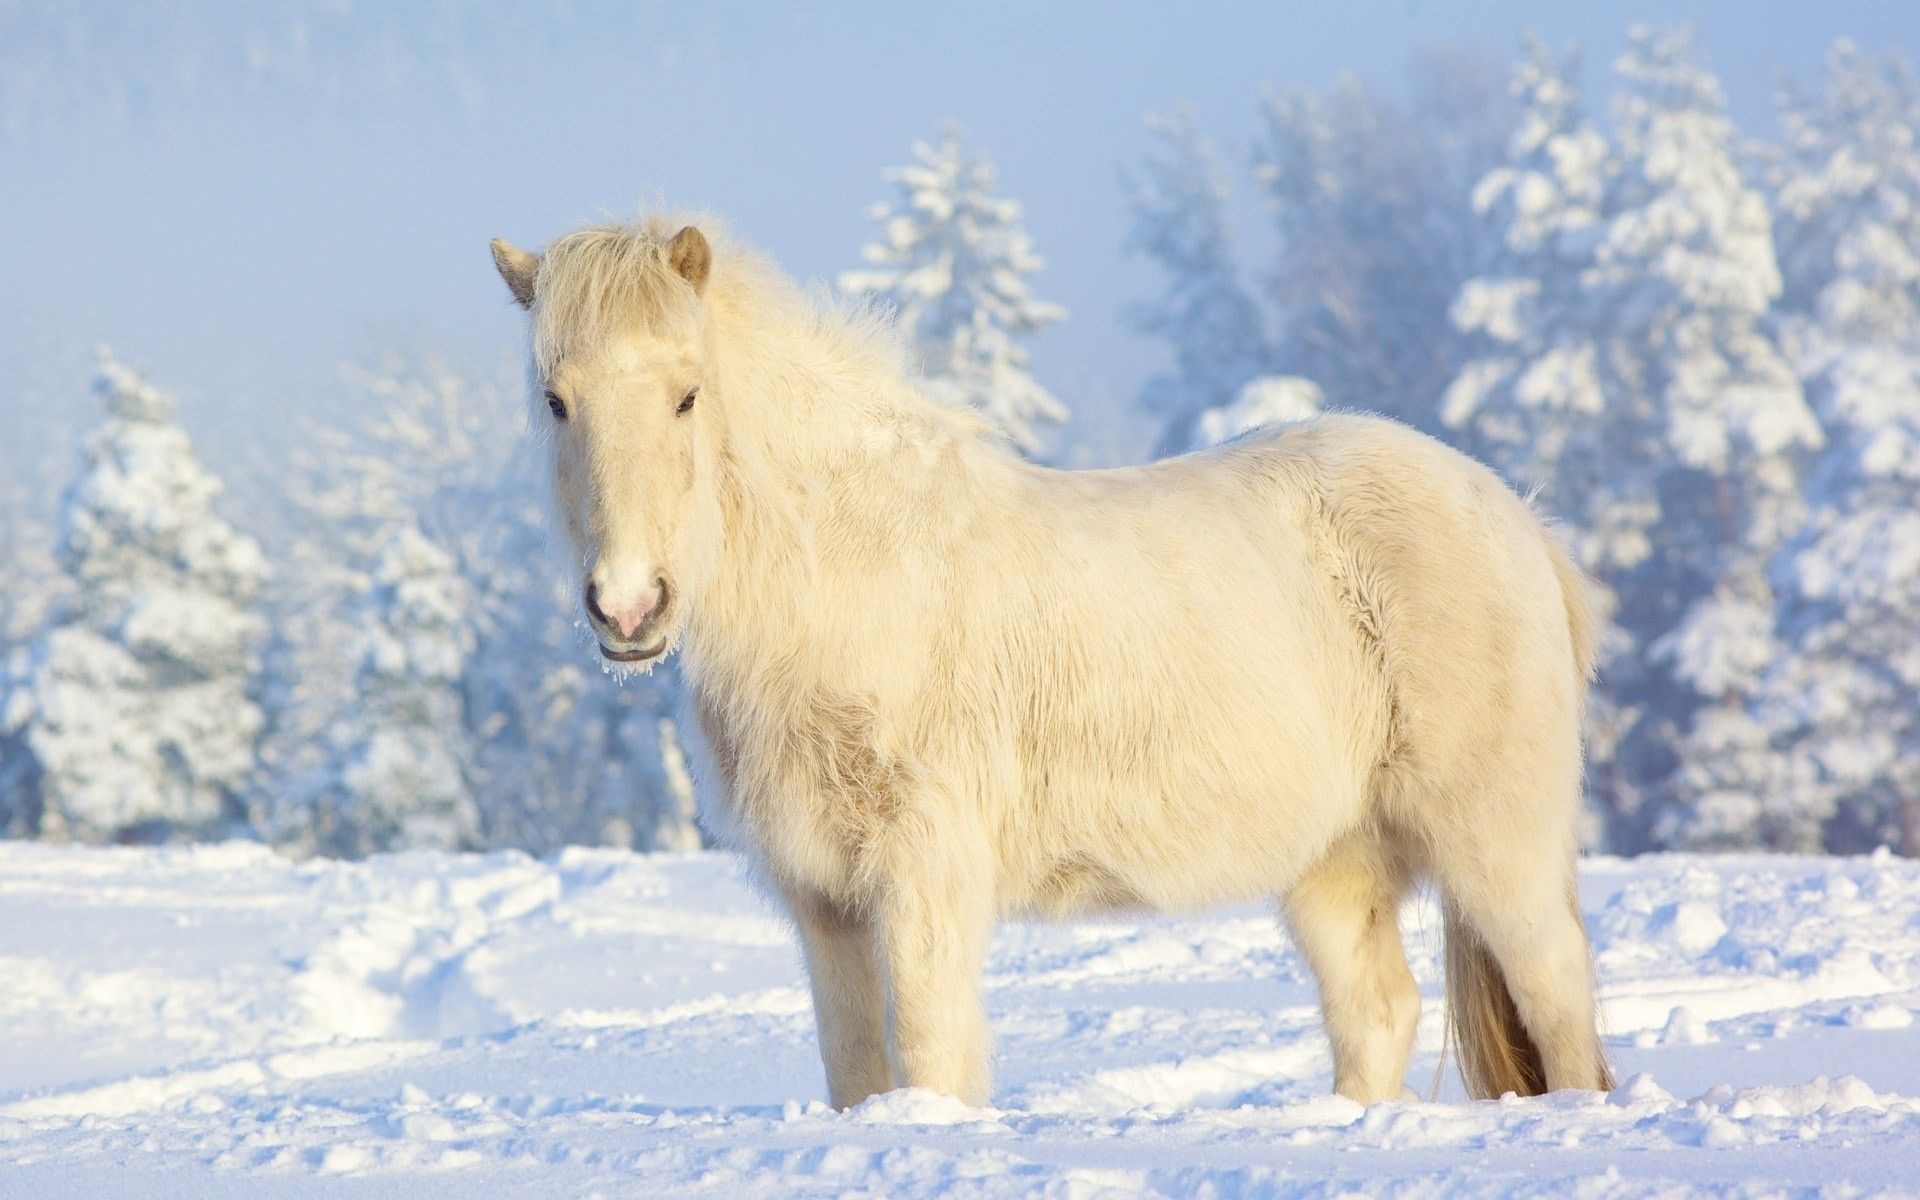 Horses in the Snow, Icelandic horses, Beautiful wallpapers, collection, 1920x1200 HD Desktop